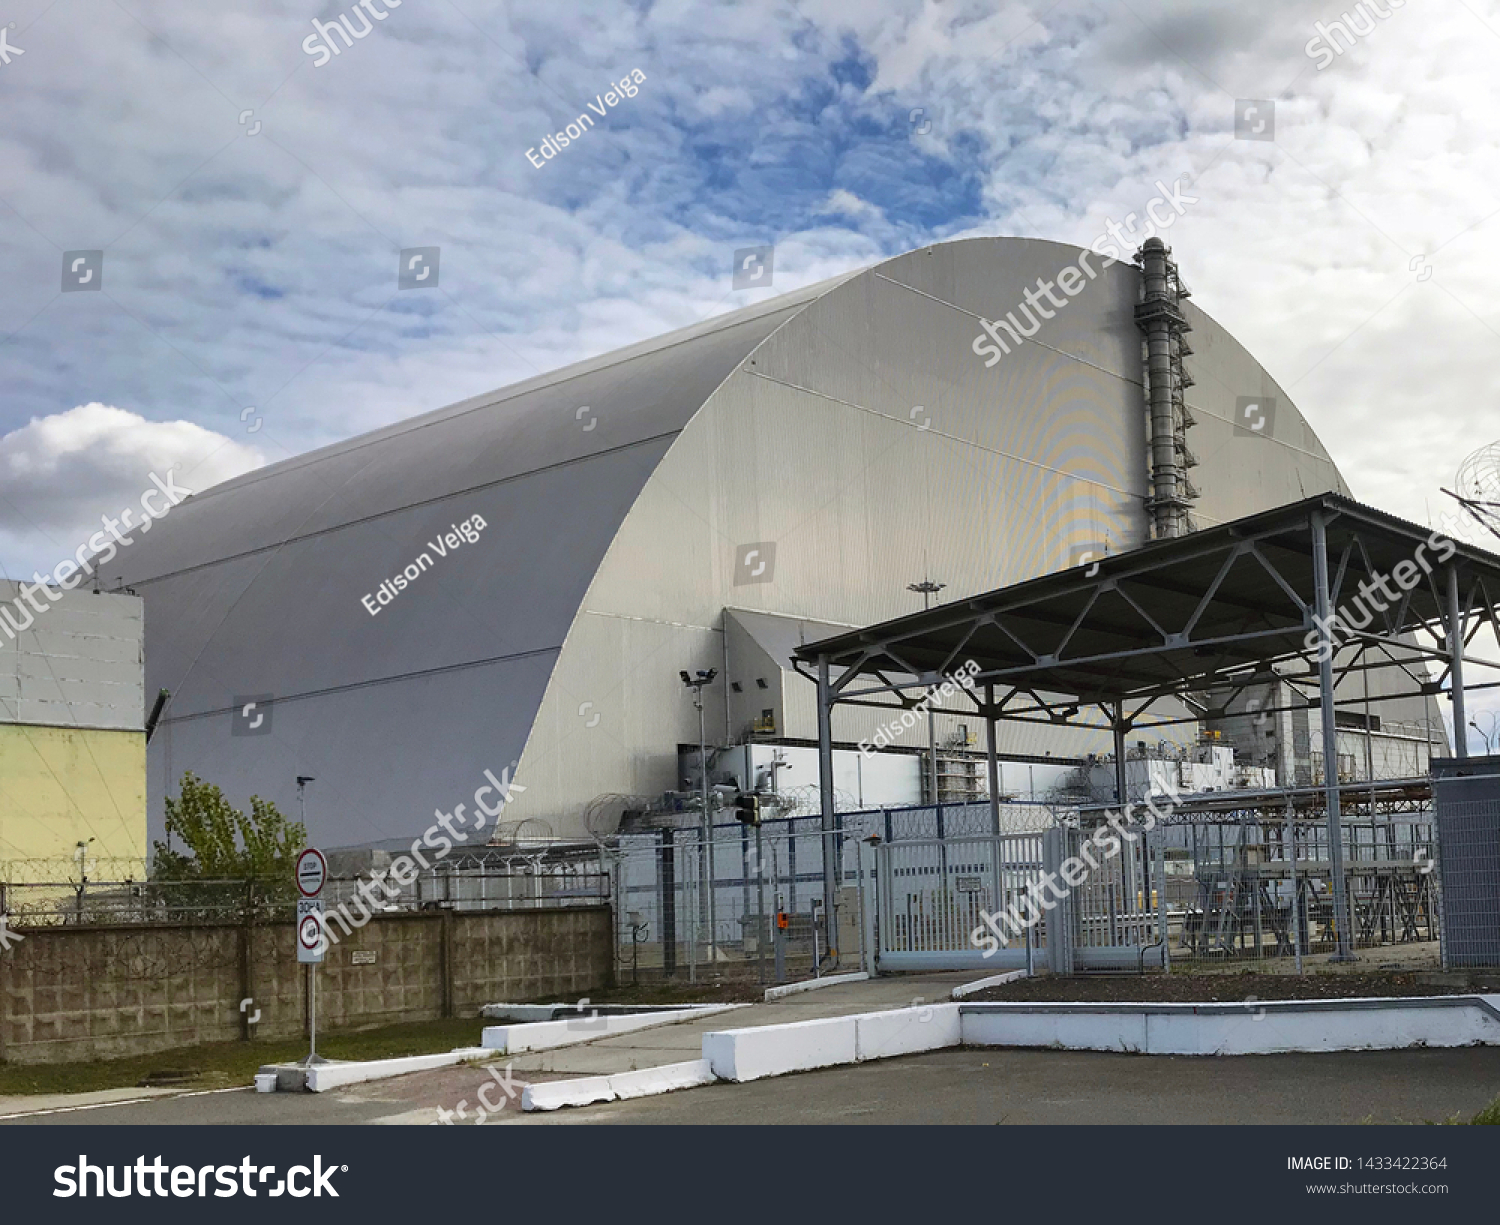 Chernobyl/ Ukraine - October 5 2018: The Chernobyl Nuclear Power Plant sarcophagus or Shelter Structure is a massive steel and concrete structure covering the nuclear reactor.  #1433422364